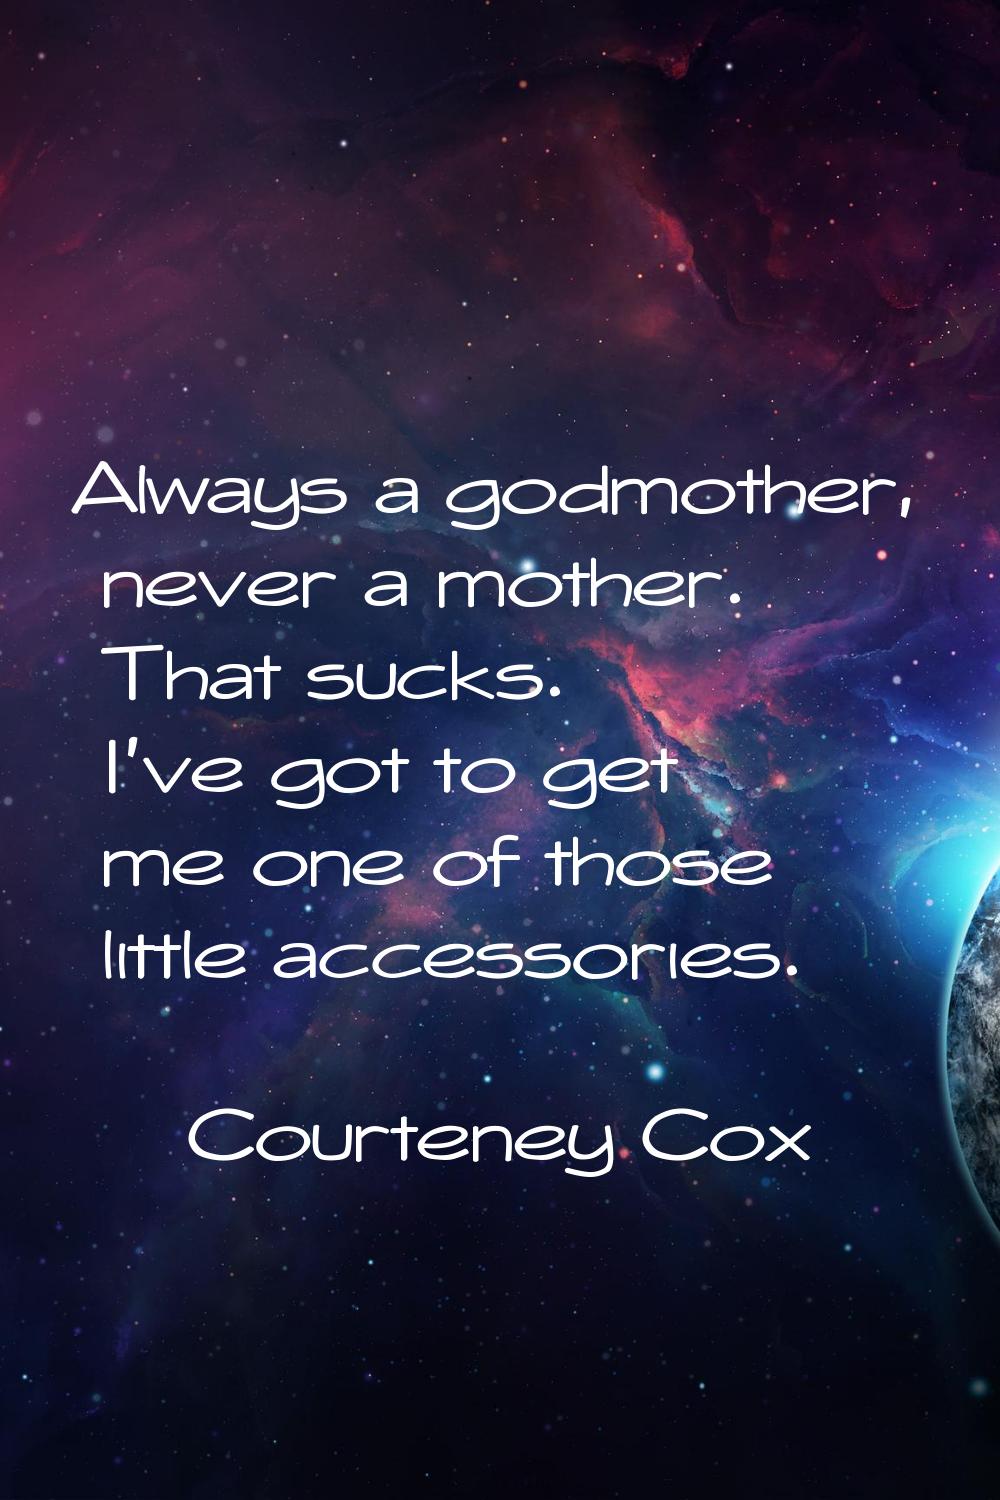 Always a godmother, never a mother. That sucks. I've got to get me one of those little accessories.